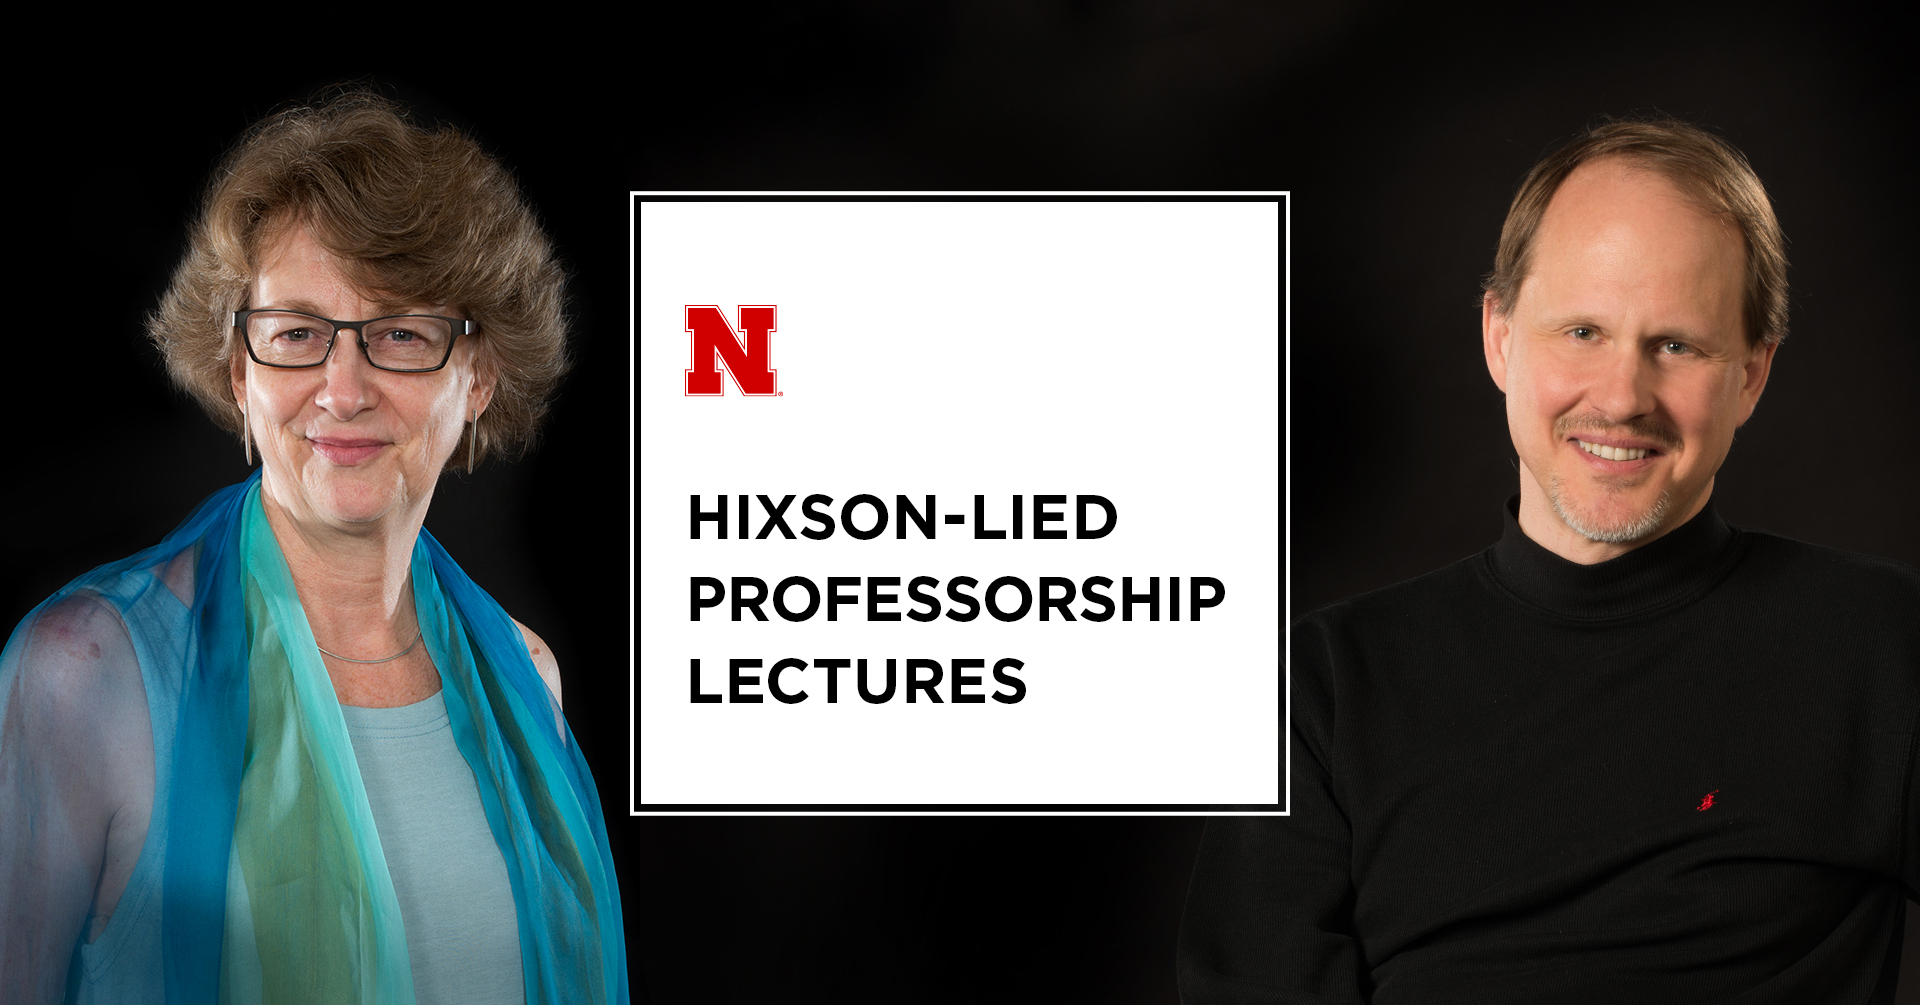 The inaugural Hixson-Lied Professorship Lectures on April 16 will feature lectures by Alison Stewart (left) and Hans Sturm.